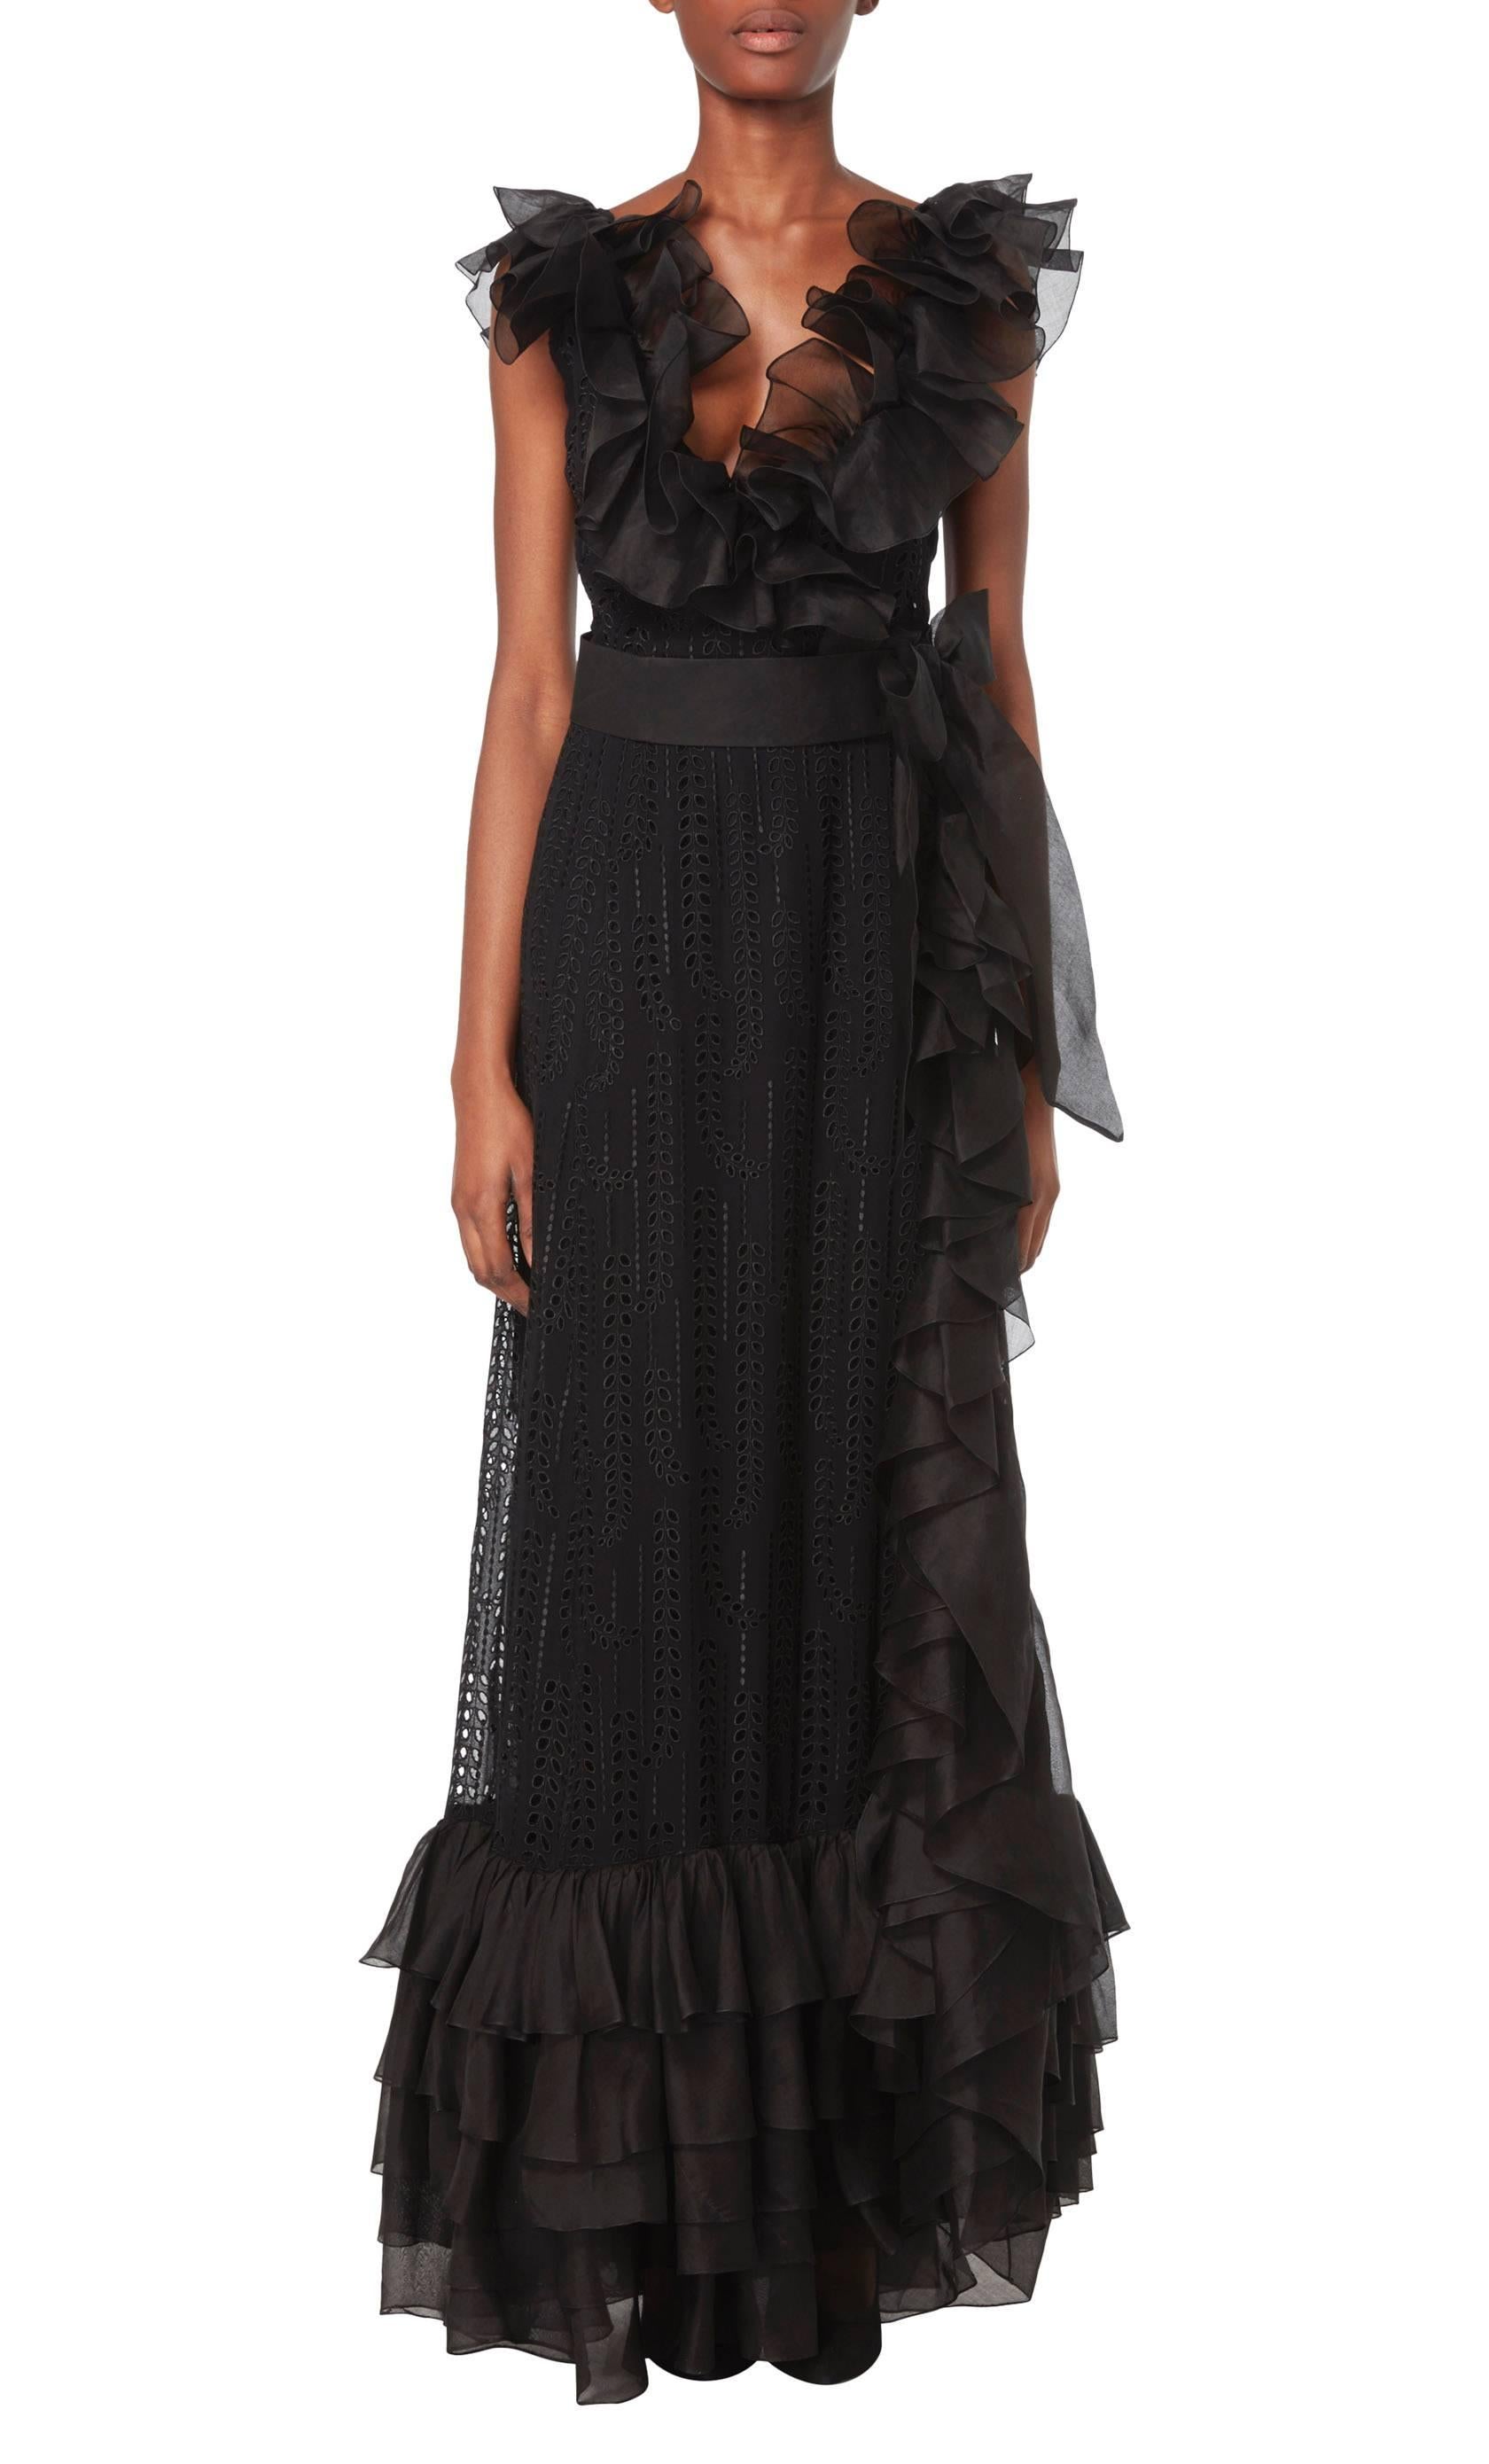 This dramatic Chanel haute couture dress is constructed in beautiful black silk georgette broderie anglaise, with a lining in the skirt and bust for opacity. The wrap front creates a flattering low-cut neckline, while a black organza belt with a bow